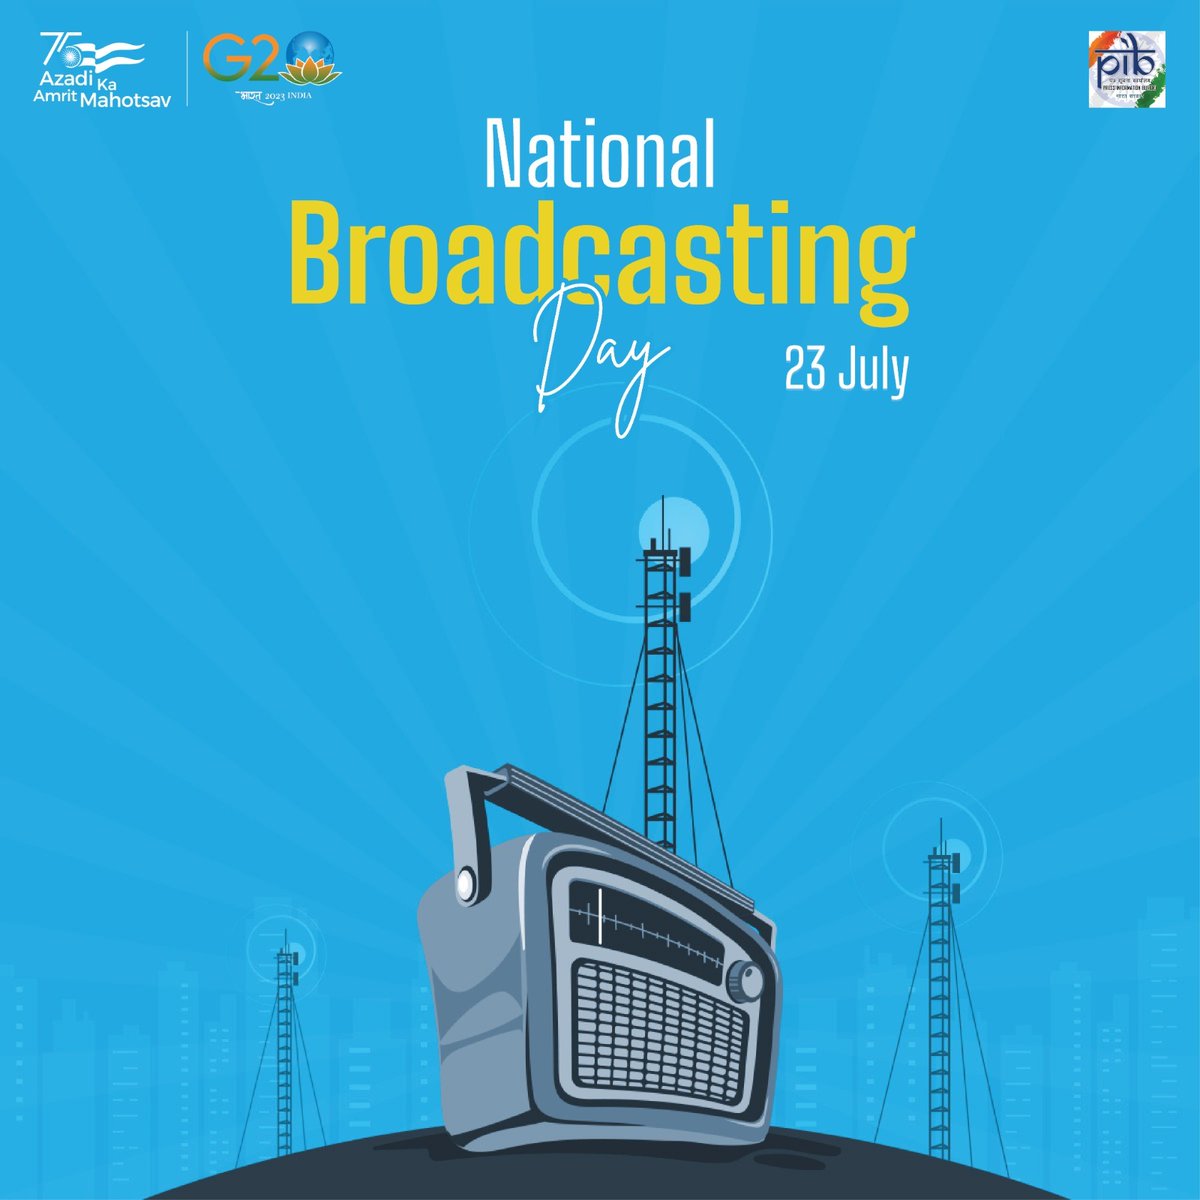 Today marks #NationalBroadcastingDay 📻

On this day in 1927, the first ever radio broadcast in the country went on air from Bombay Station, by Indian Broadcasting Company.

In 1936, the company became #AllIndiaRadio, one of the largest broadcasters in the world